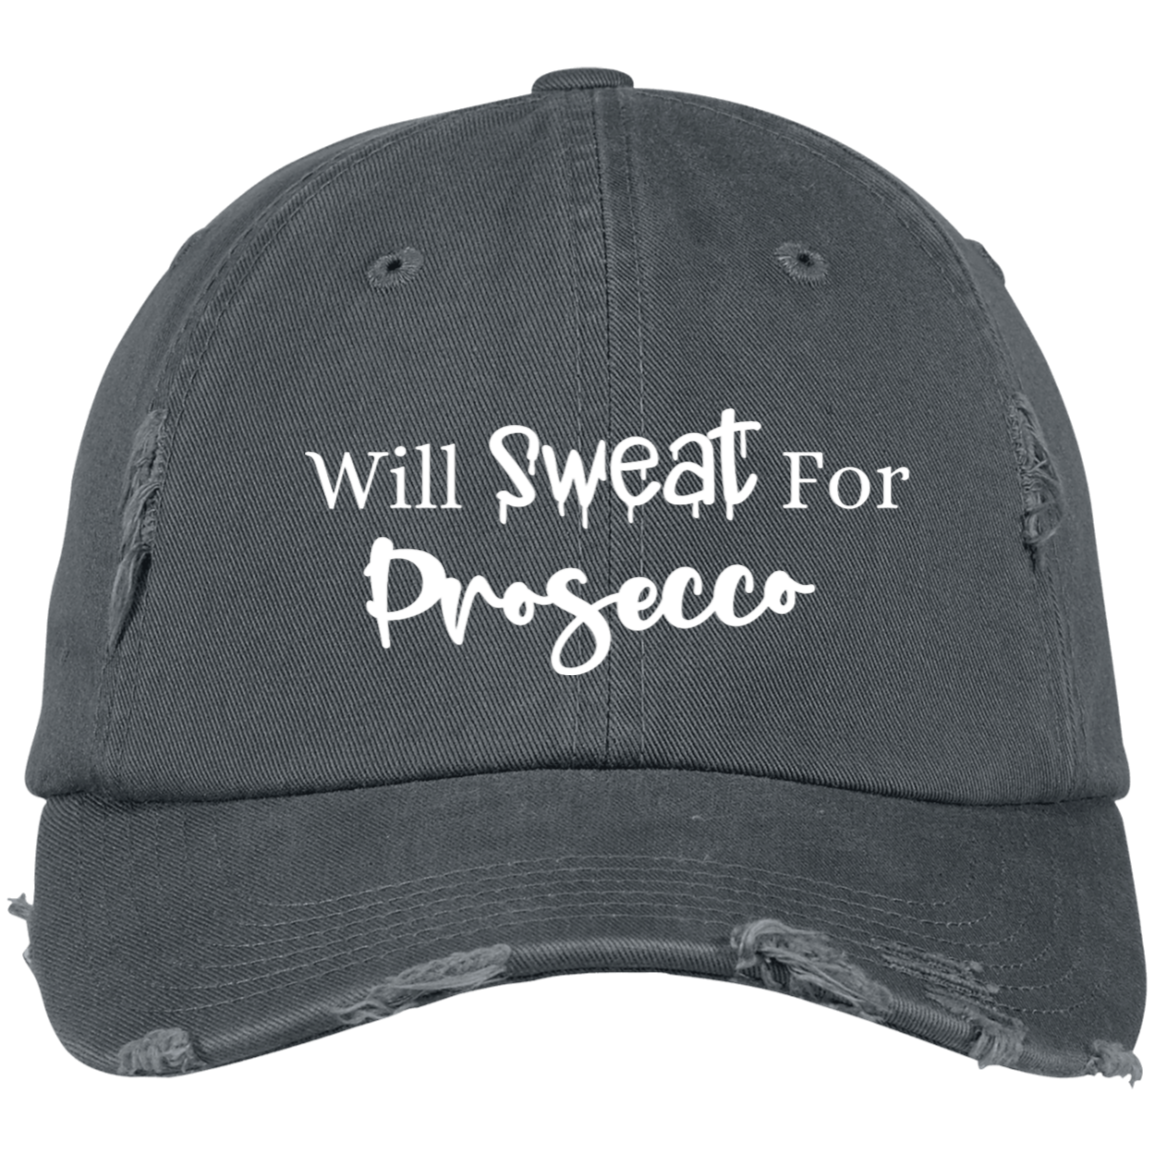 Prosecco Embroidered Distressed Dad Cap